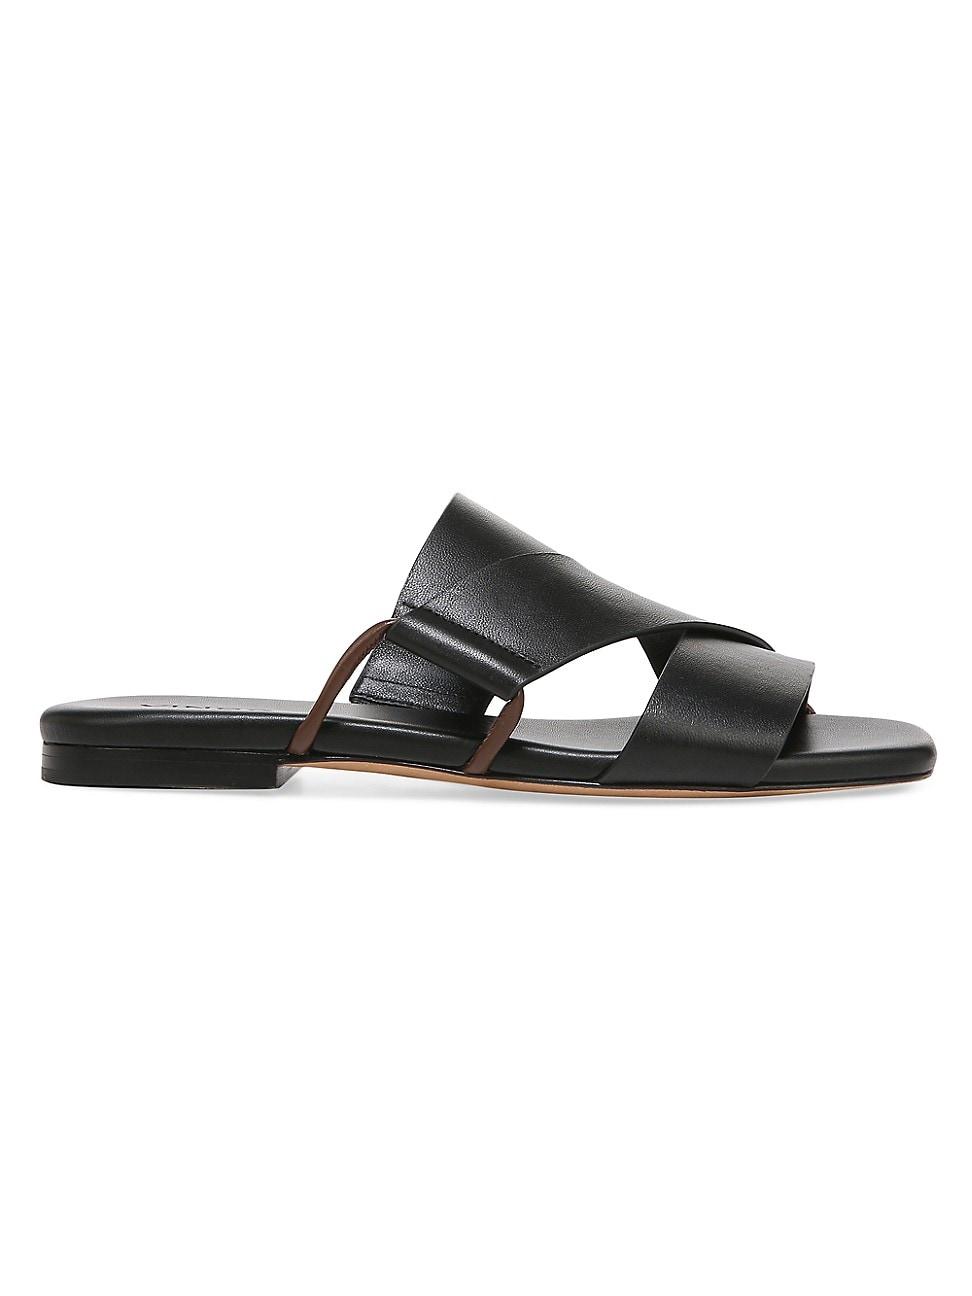 Vince Dylan Leather Sandals in Black | Lyst